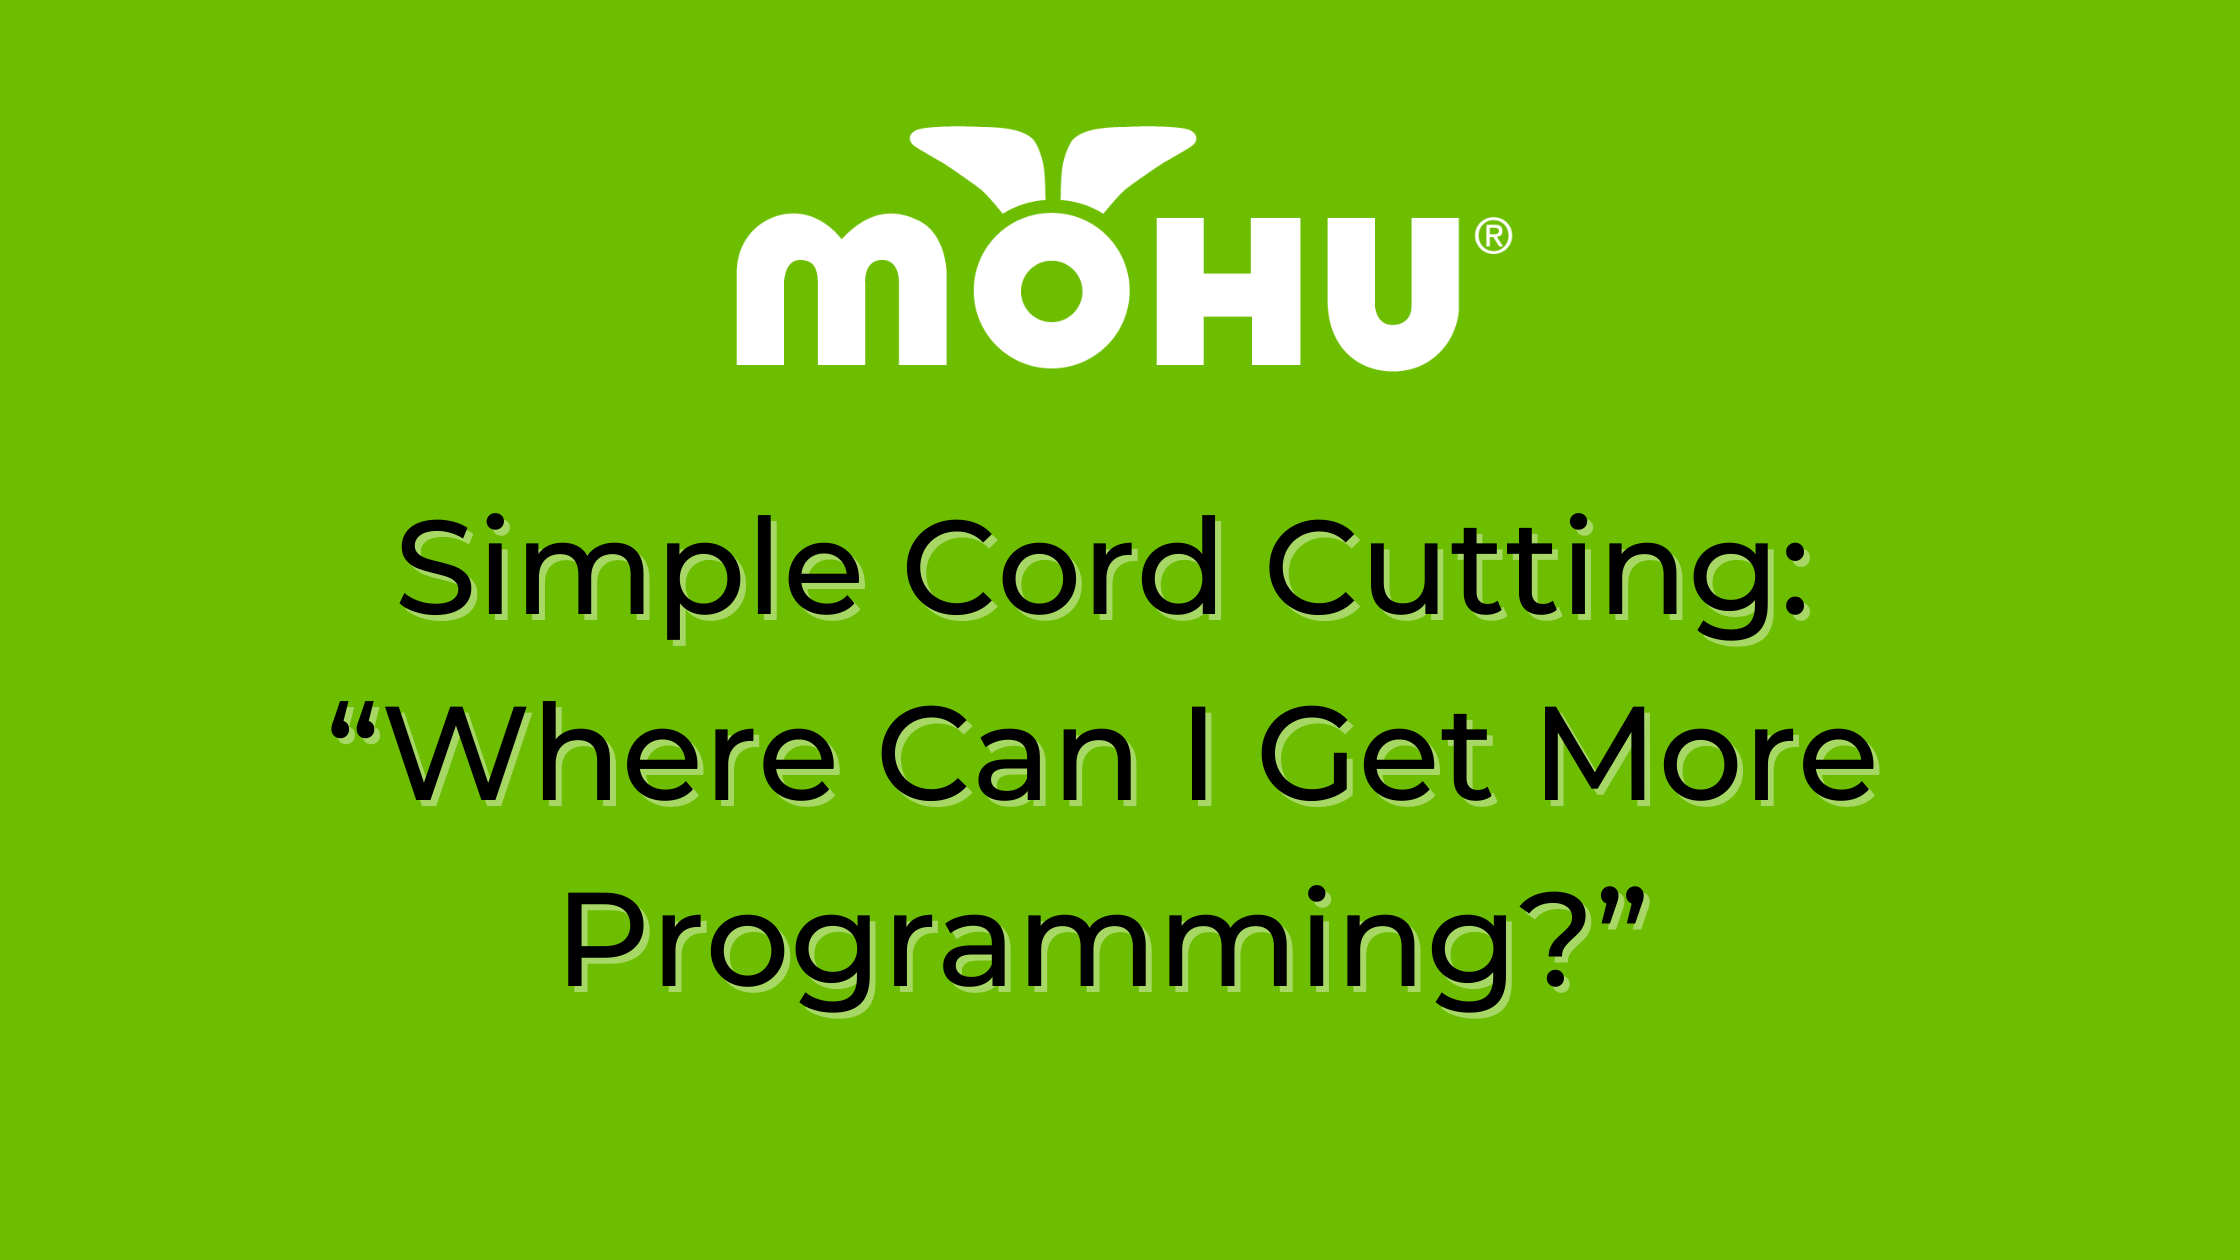 Simple Cord Cutting “Where Can I Get More Programming”, Mohu